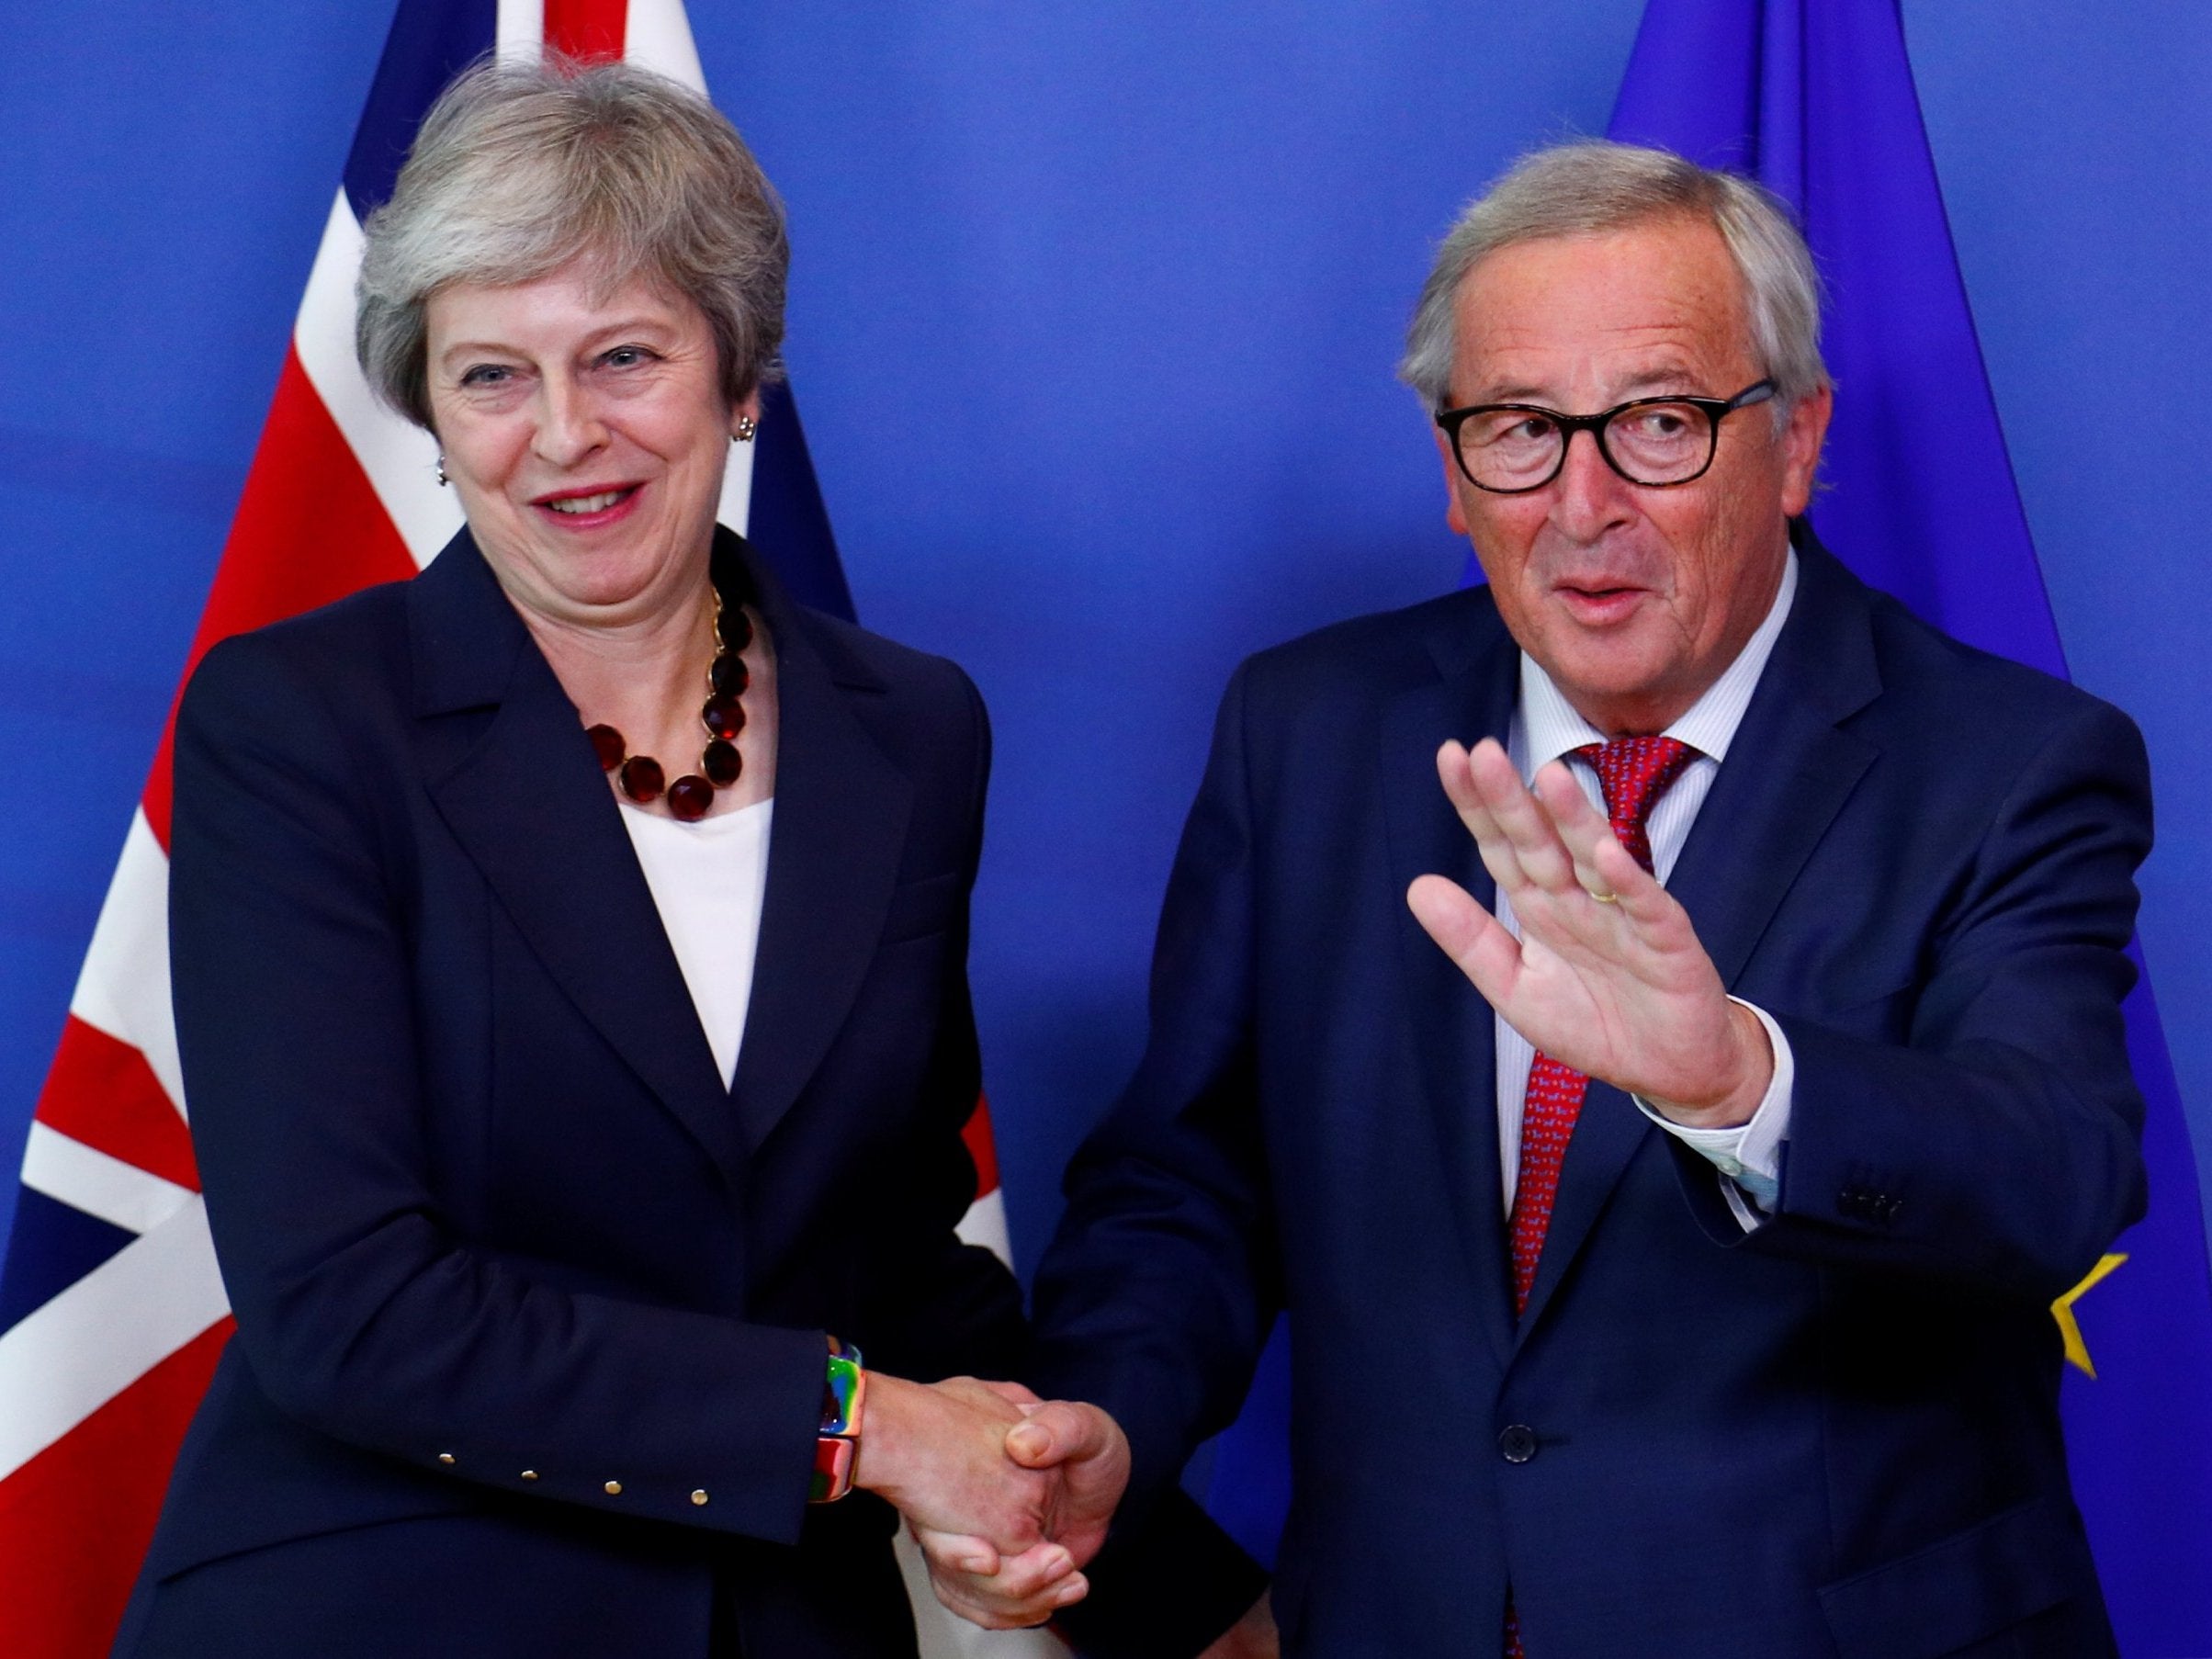 Jean-Claude Juncker’s colleagues in Brussels think growth in the eurozone and the EU will slow down too in 2019, but not to the extent that it will in the UK